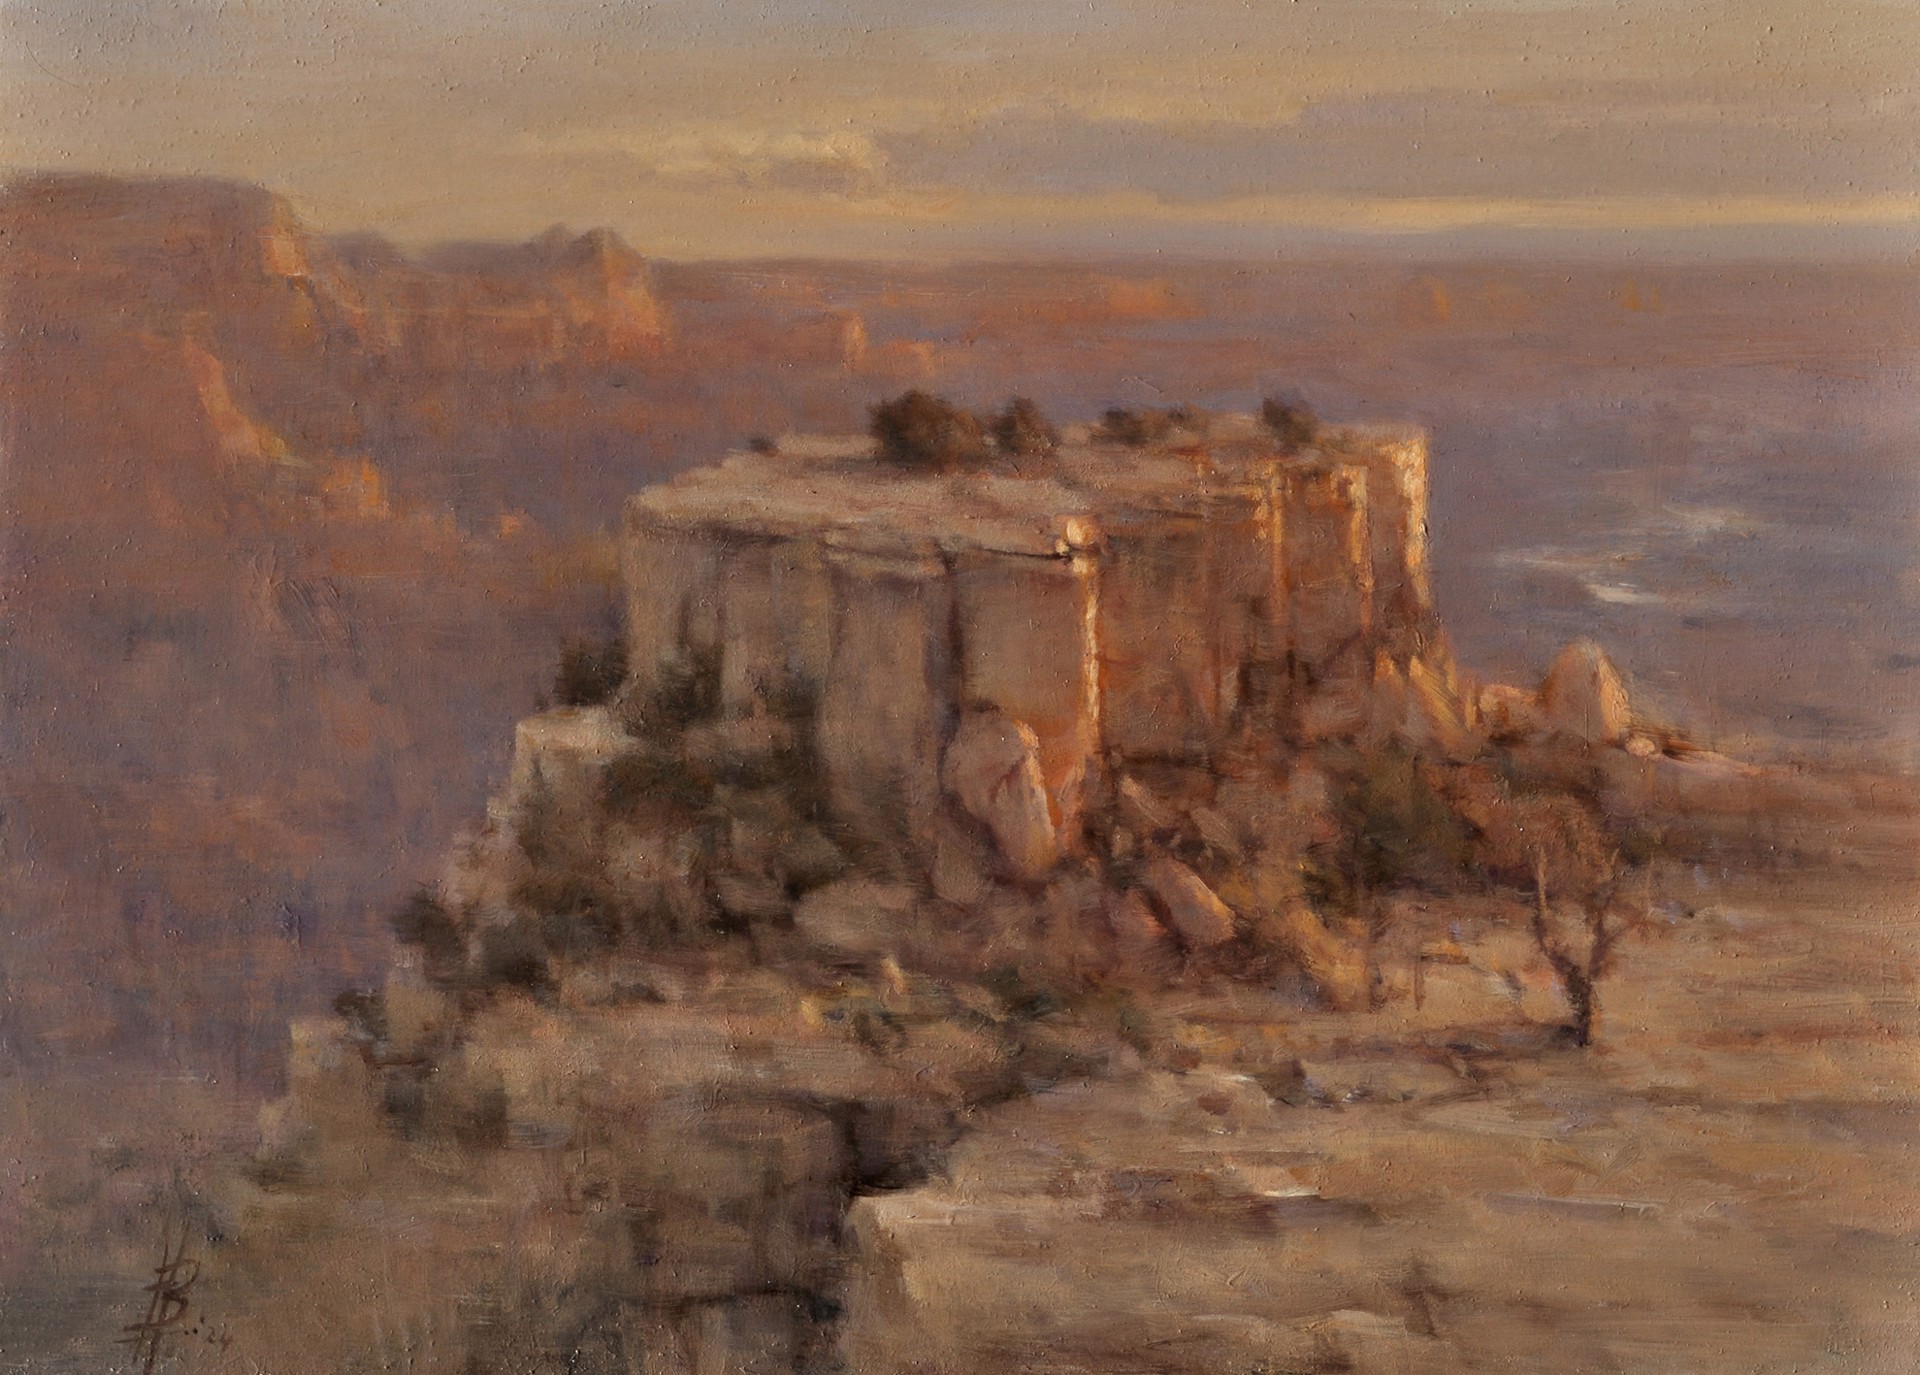 Sunrise at Moran Point, Grand Canyon by André Balyon